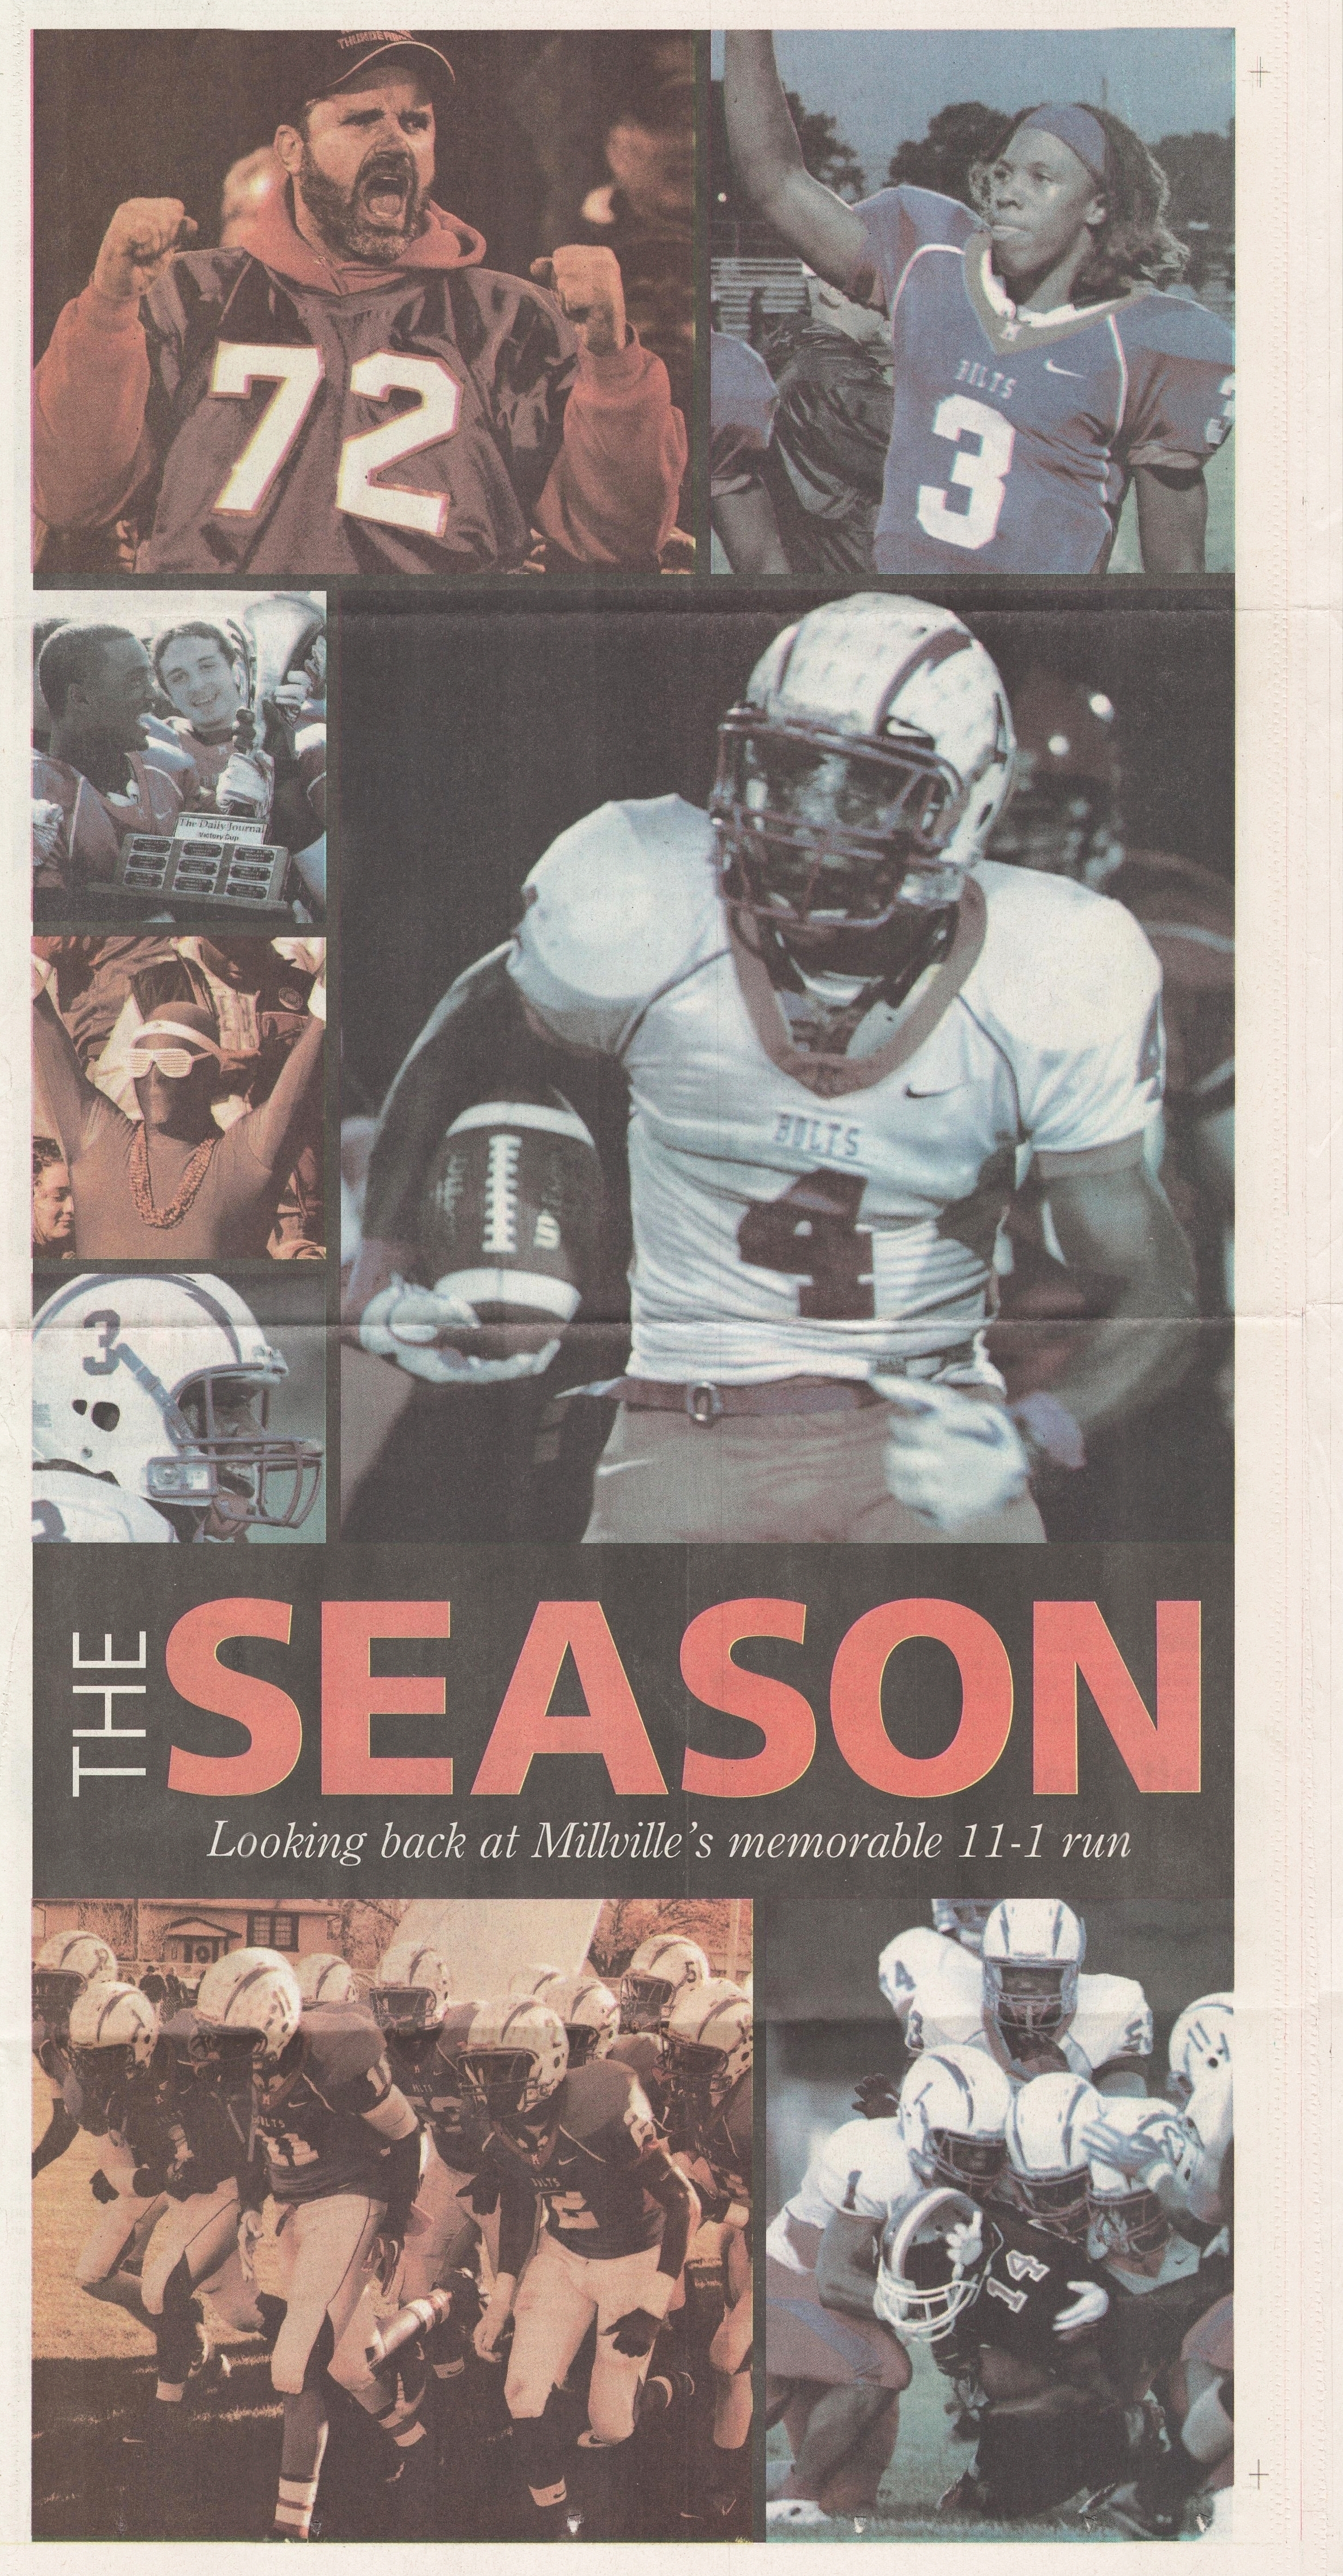  Millville Thunderbolts Football 2011 Season Special Supplement  The Daily Journal  